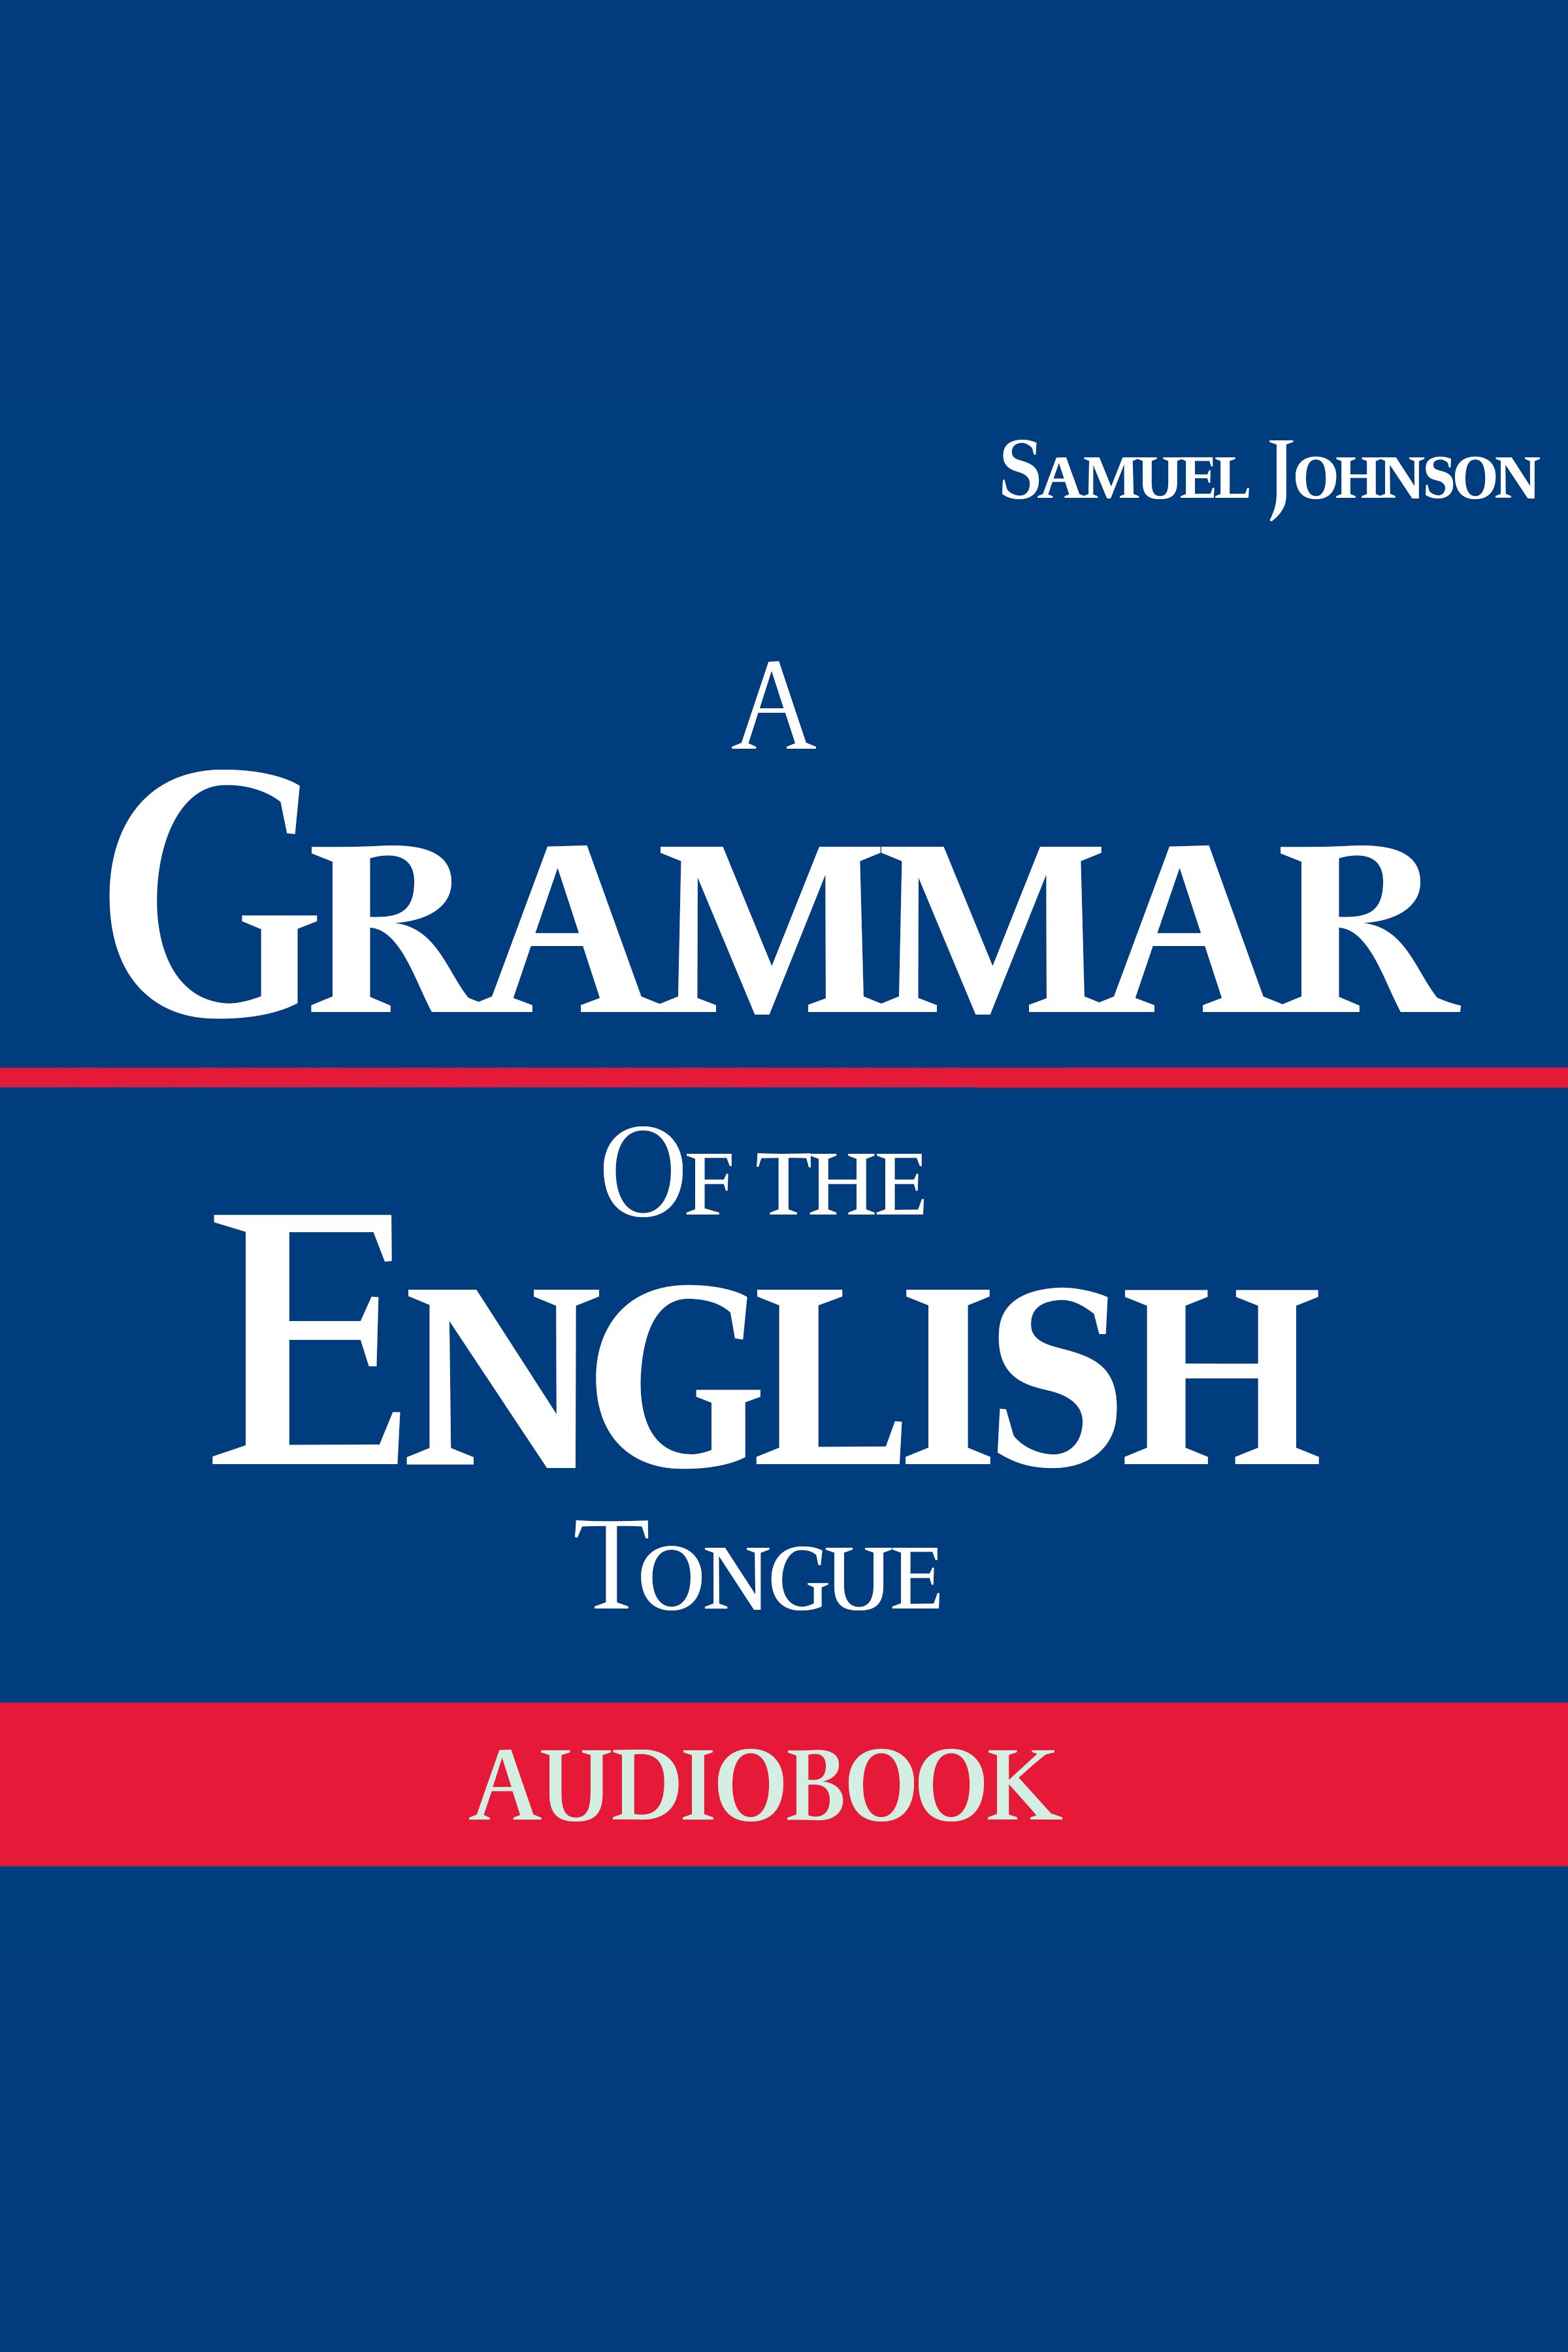 A Grammar of the English Tongue cover image